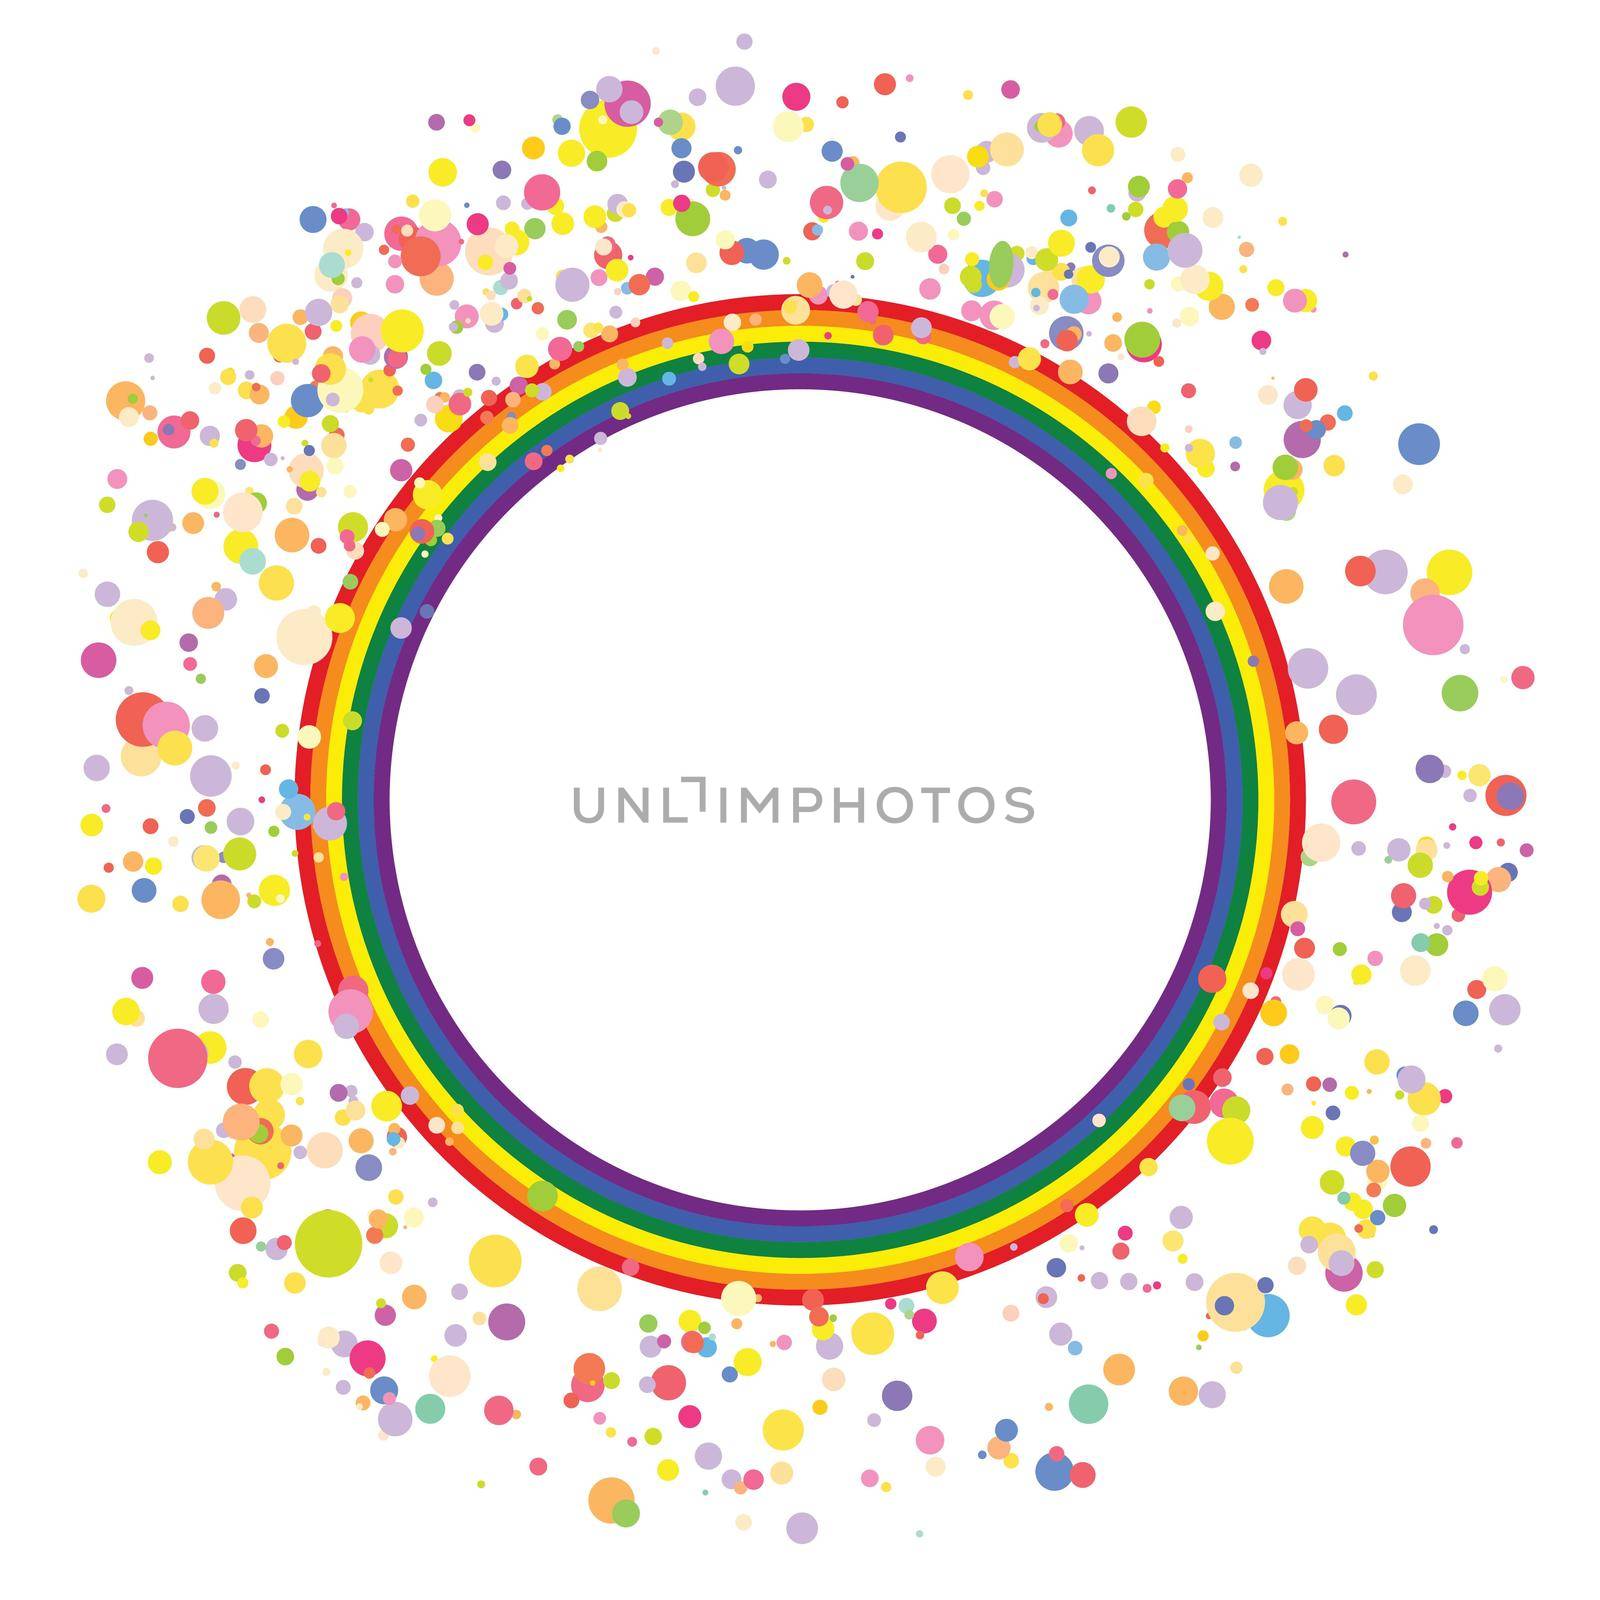 Flag LGBT icon, round frame with confetti. Template design, vector illustration. Love wins. LGBT symbol in rainbow colors. Gay pride collection.